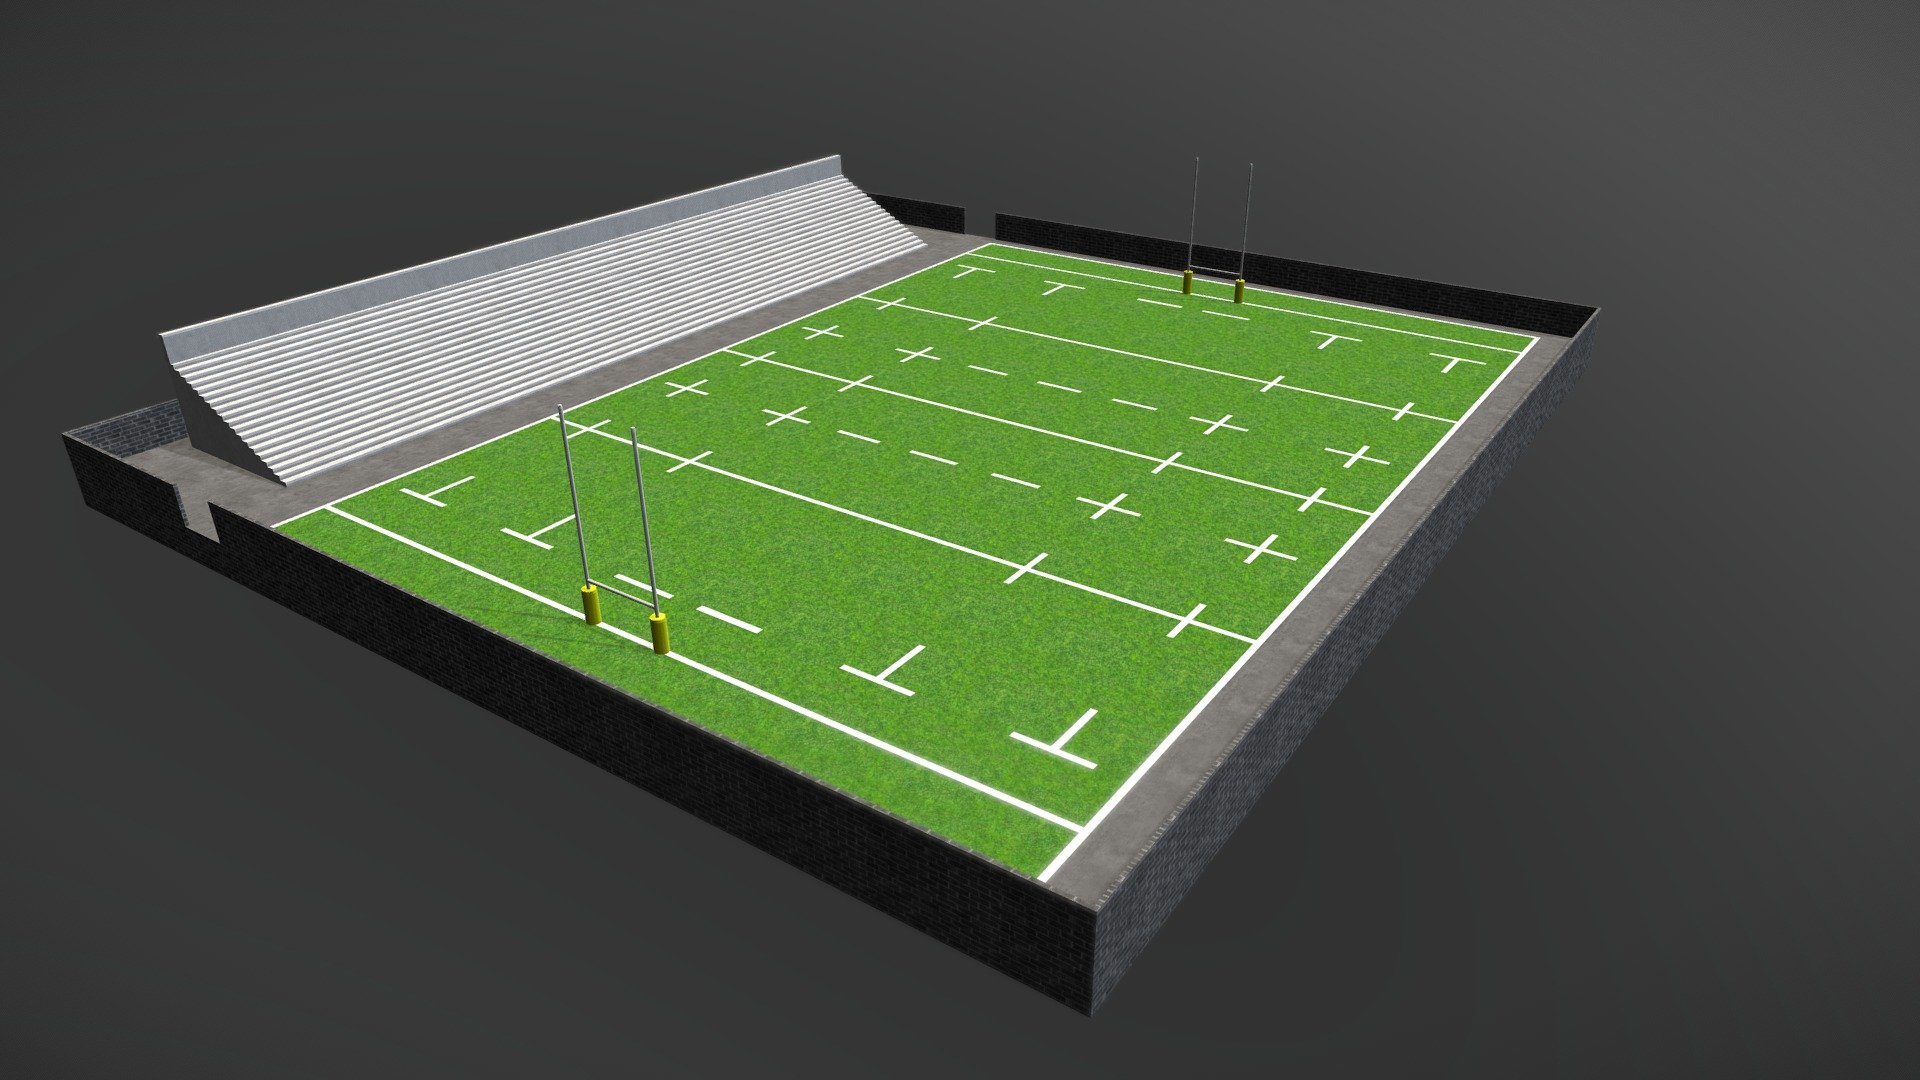 A rugby field I originally made for the game  Cities: Skylines, but as I lack knowledge on how to import it into the game, I thought I'd put it out here instead. It's 96x104 metres (12x13 in-game tiles), and is made 1:1 relative to the official rugby field measurements 3d model